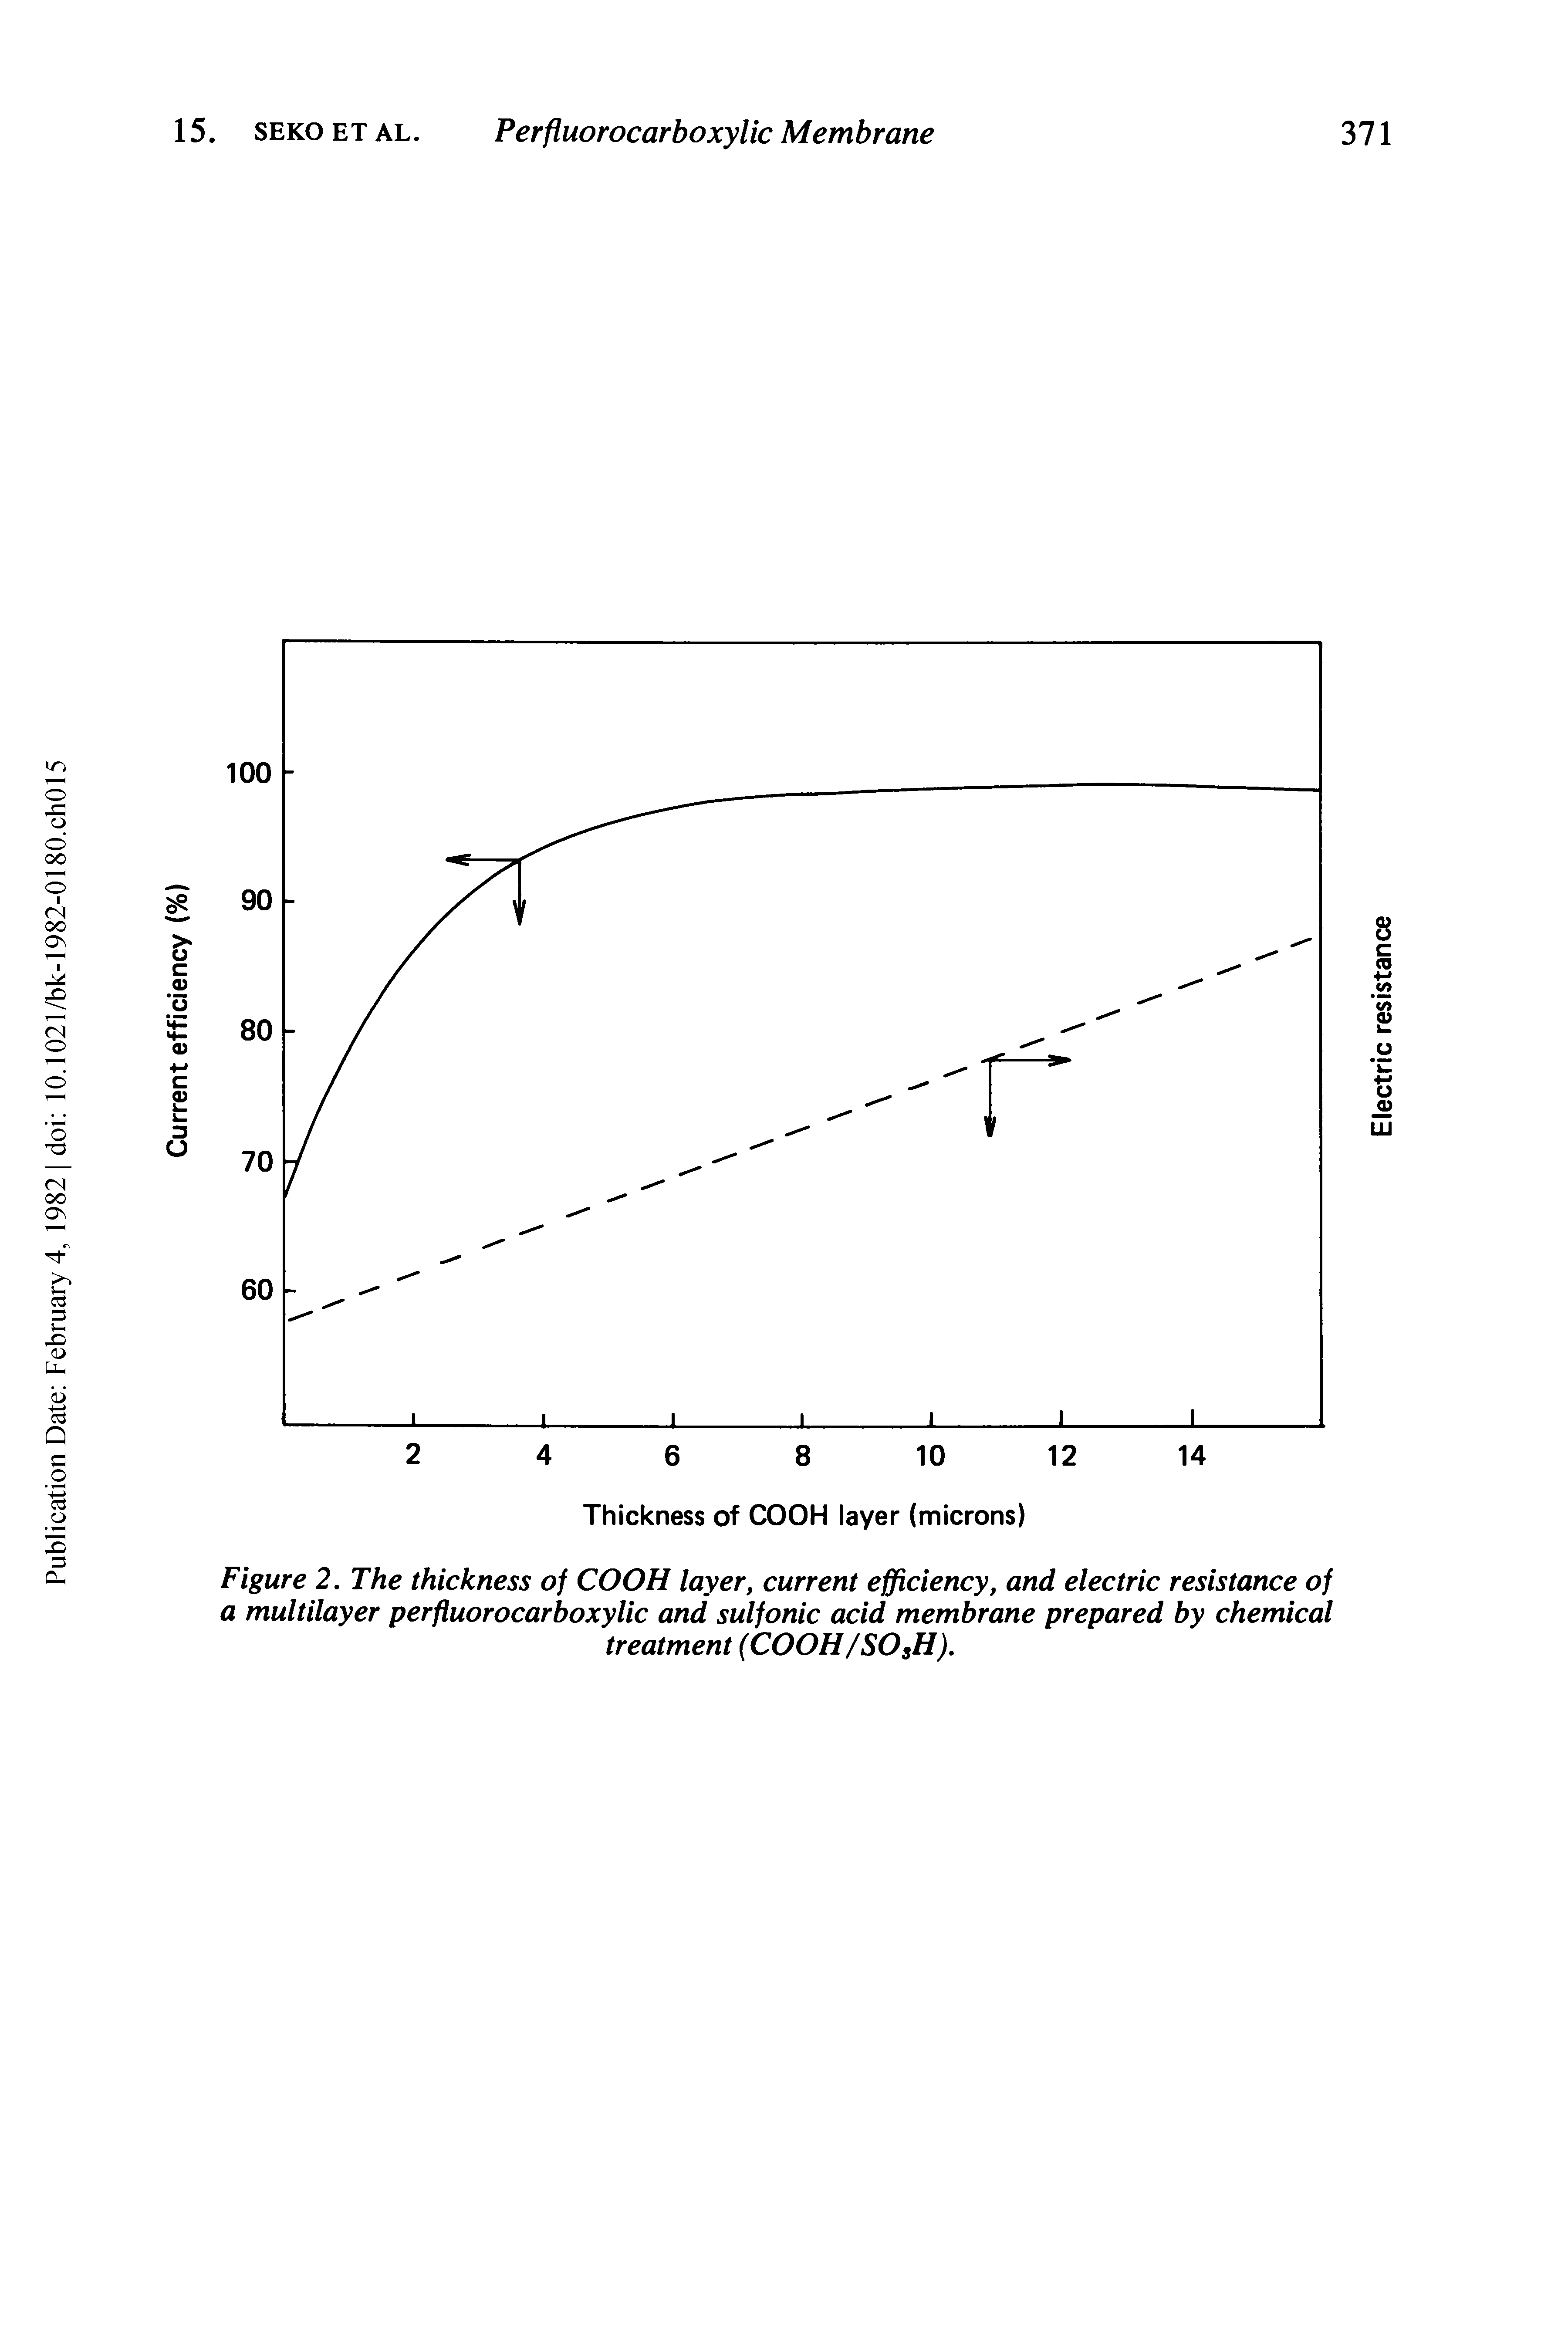 Figure 2. The thickness of CO OH layer, current efficiency, and electric resistance of a multilayer perfluorocarboxylic and sulfonic acid membrane prepared by chemical treatment (COOH/SOsH).